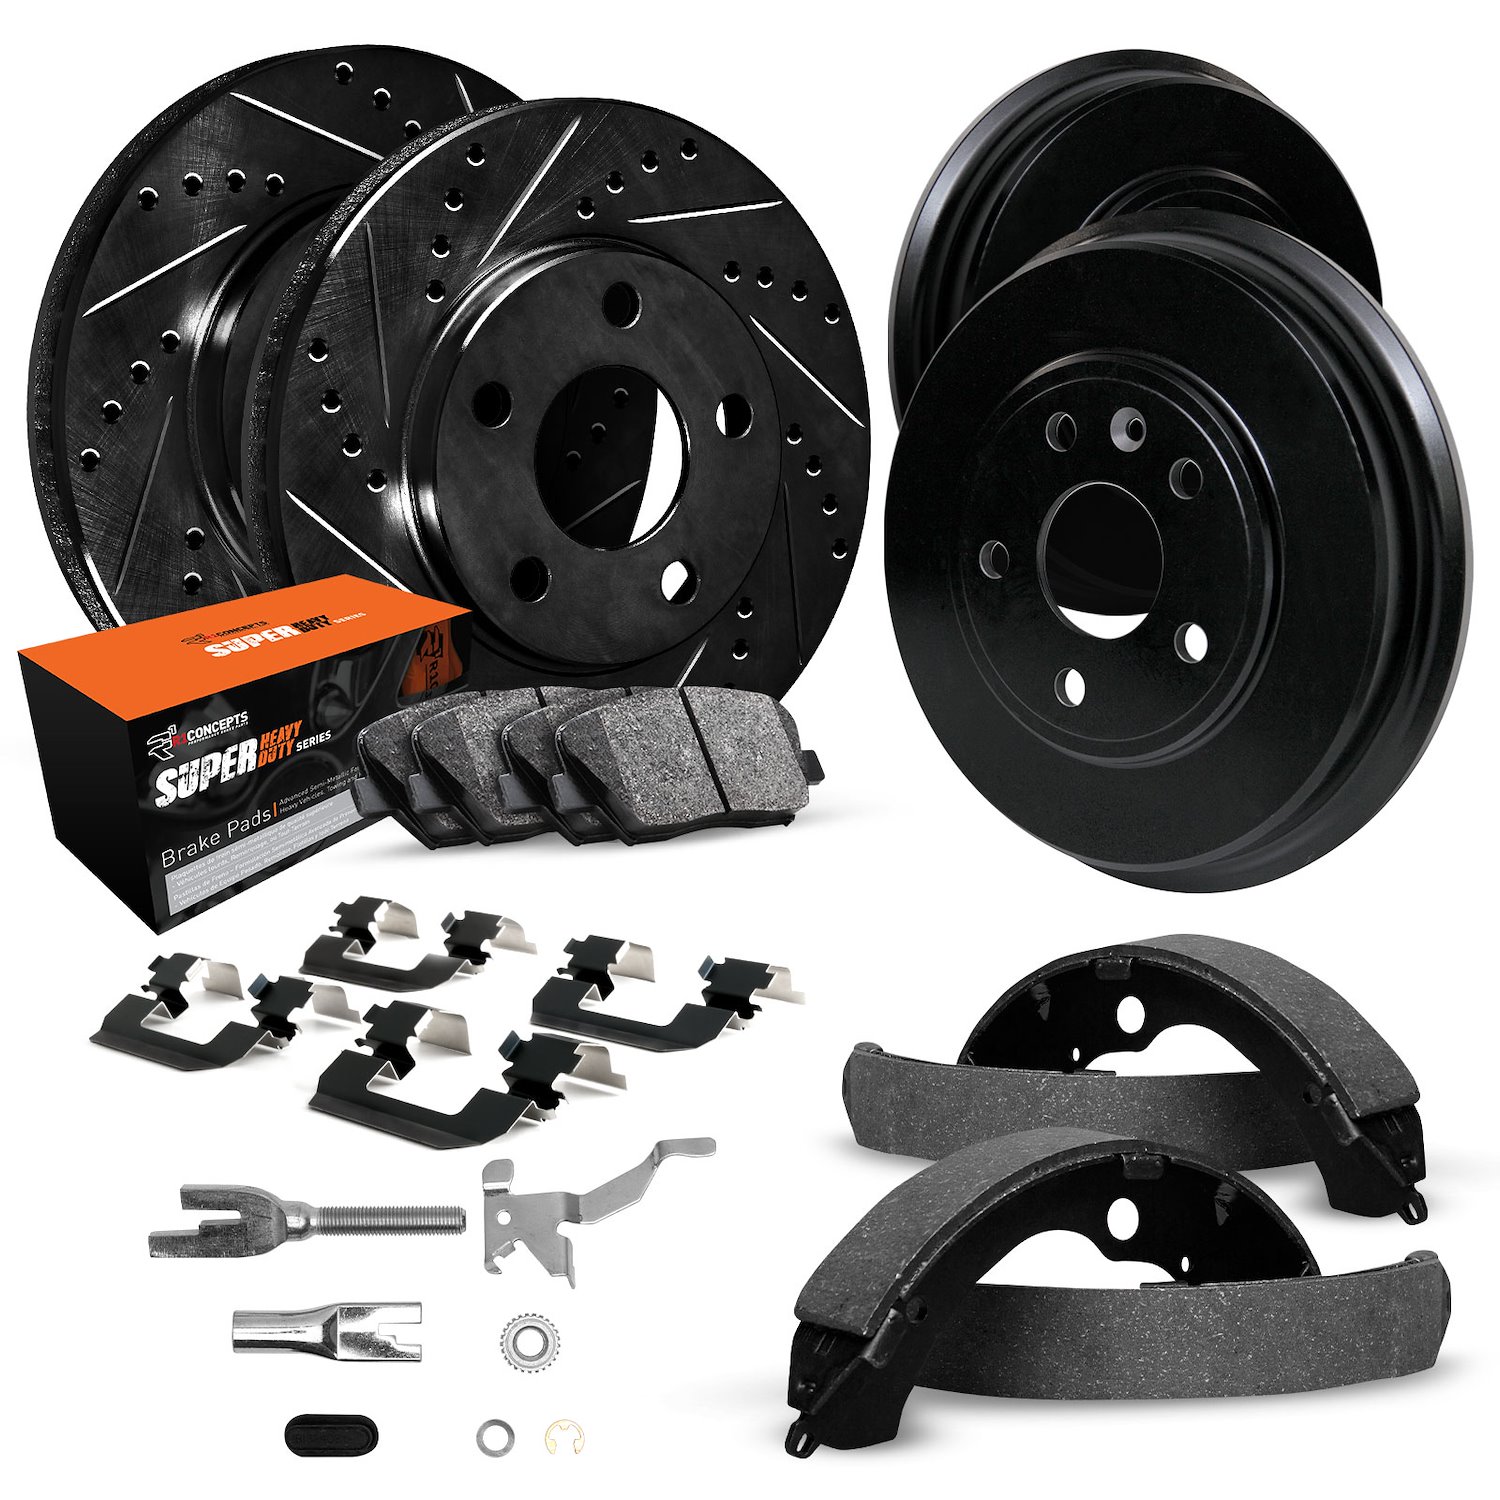 E-Line Drilled/Slotted Black Rotor & Drum Set w/Super-Duty Pads, Shoes, Hardware/Adjusters, 1988-1991 GM